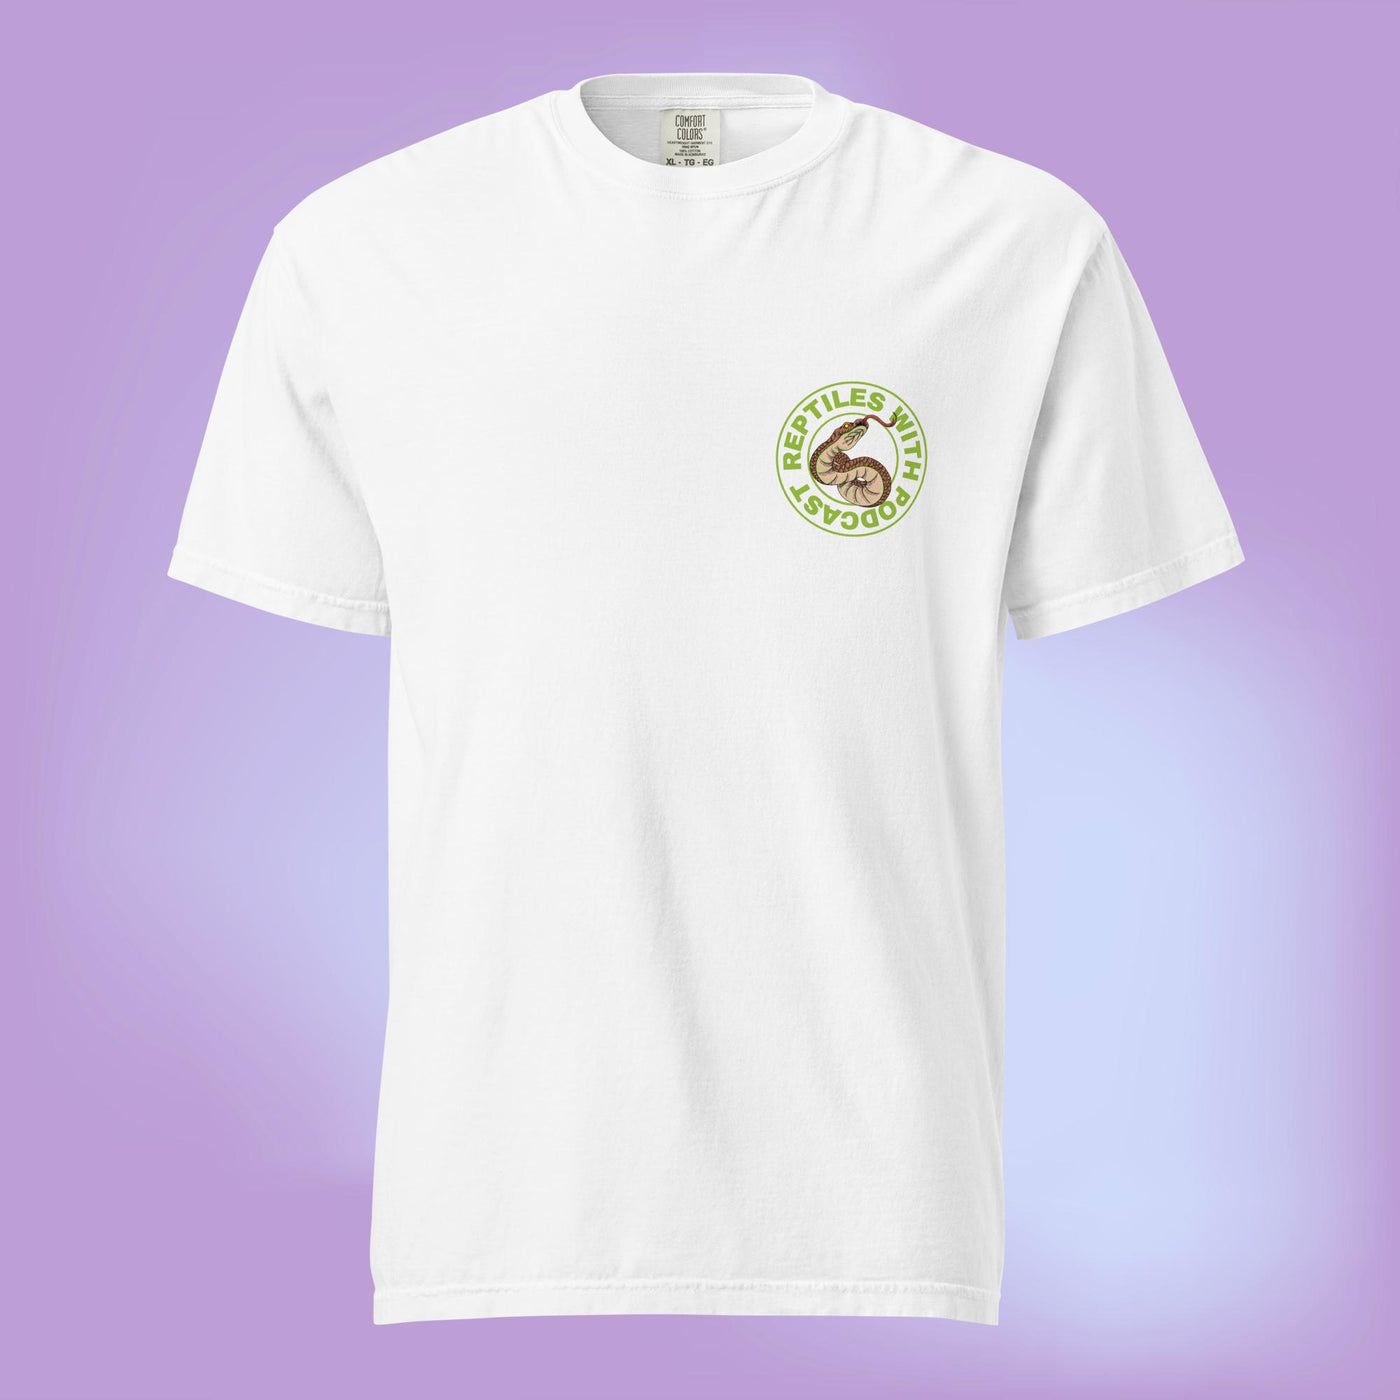 Reptiles With Snake t-shirt